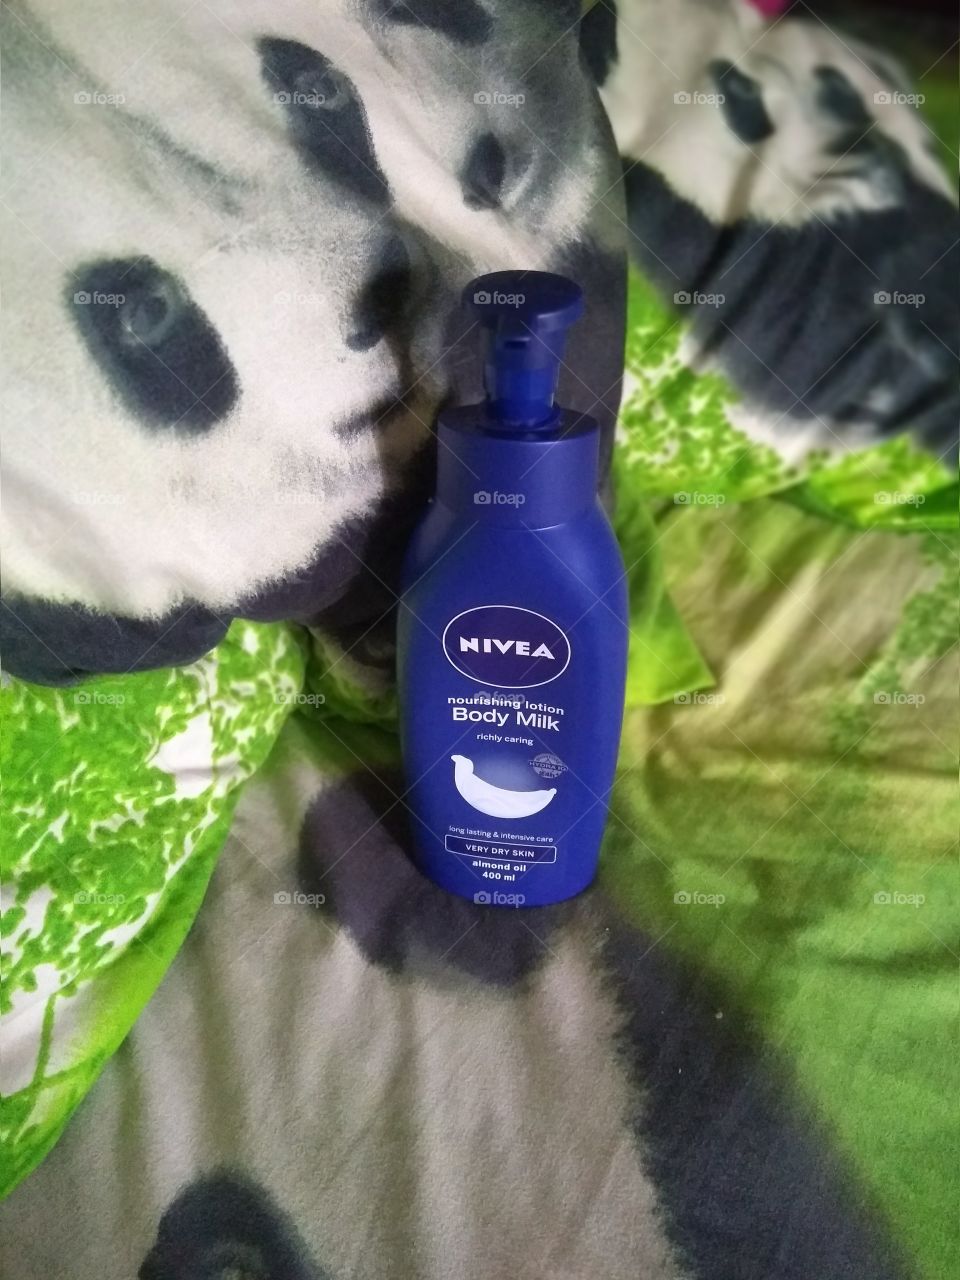 Nivea. I am using this product from last two months, it's nourishing to my body for 12 Hours. Great Product my Wife Loves it so much, Thanks NIVEA